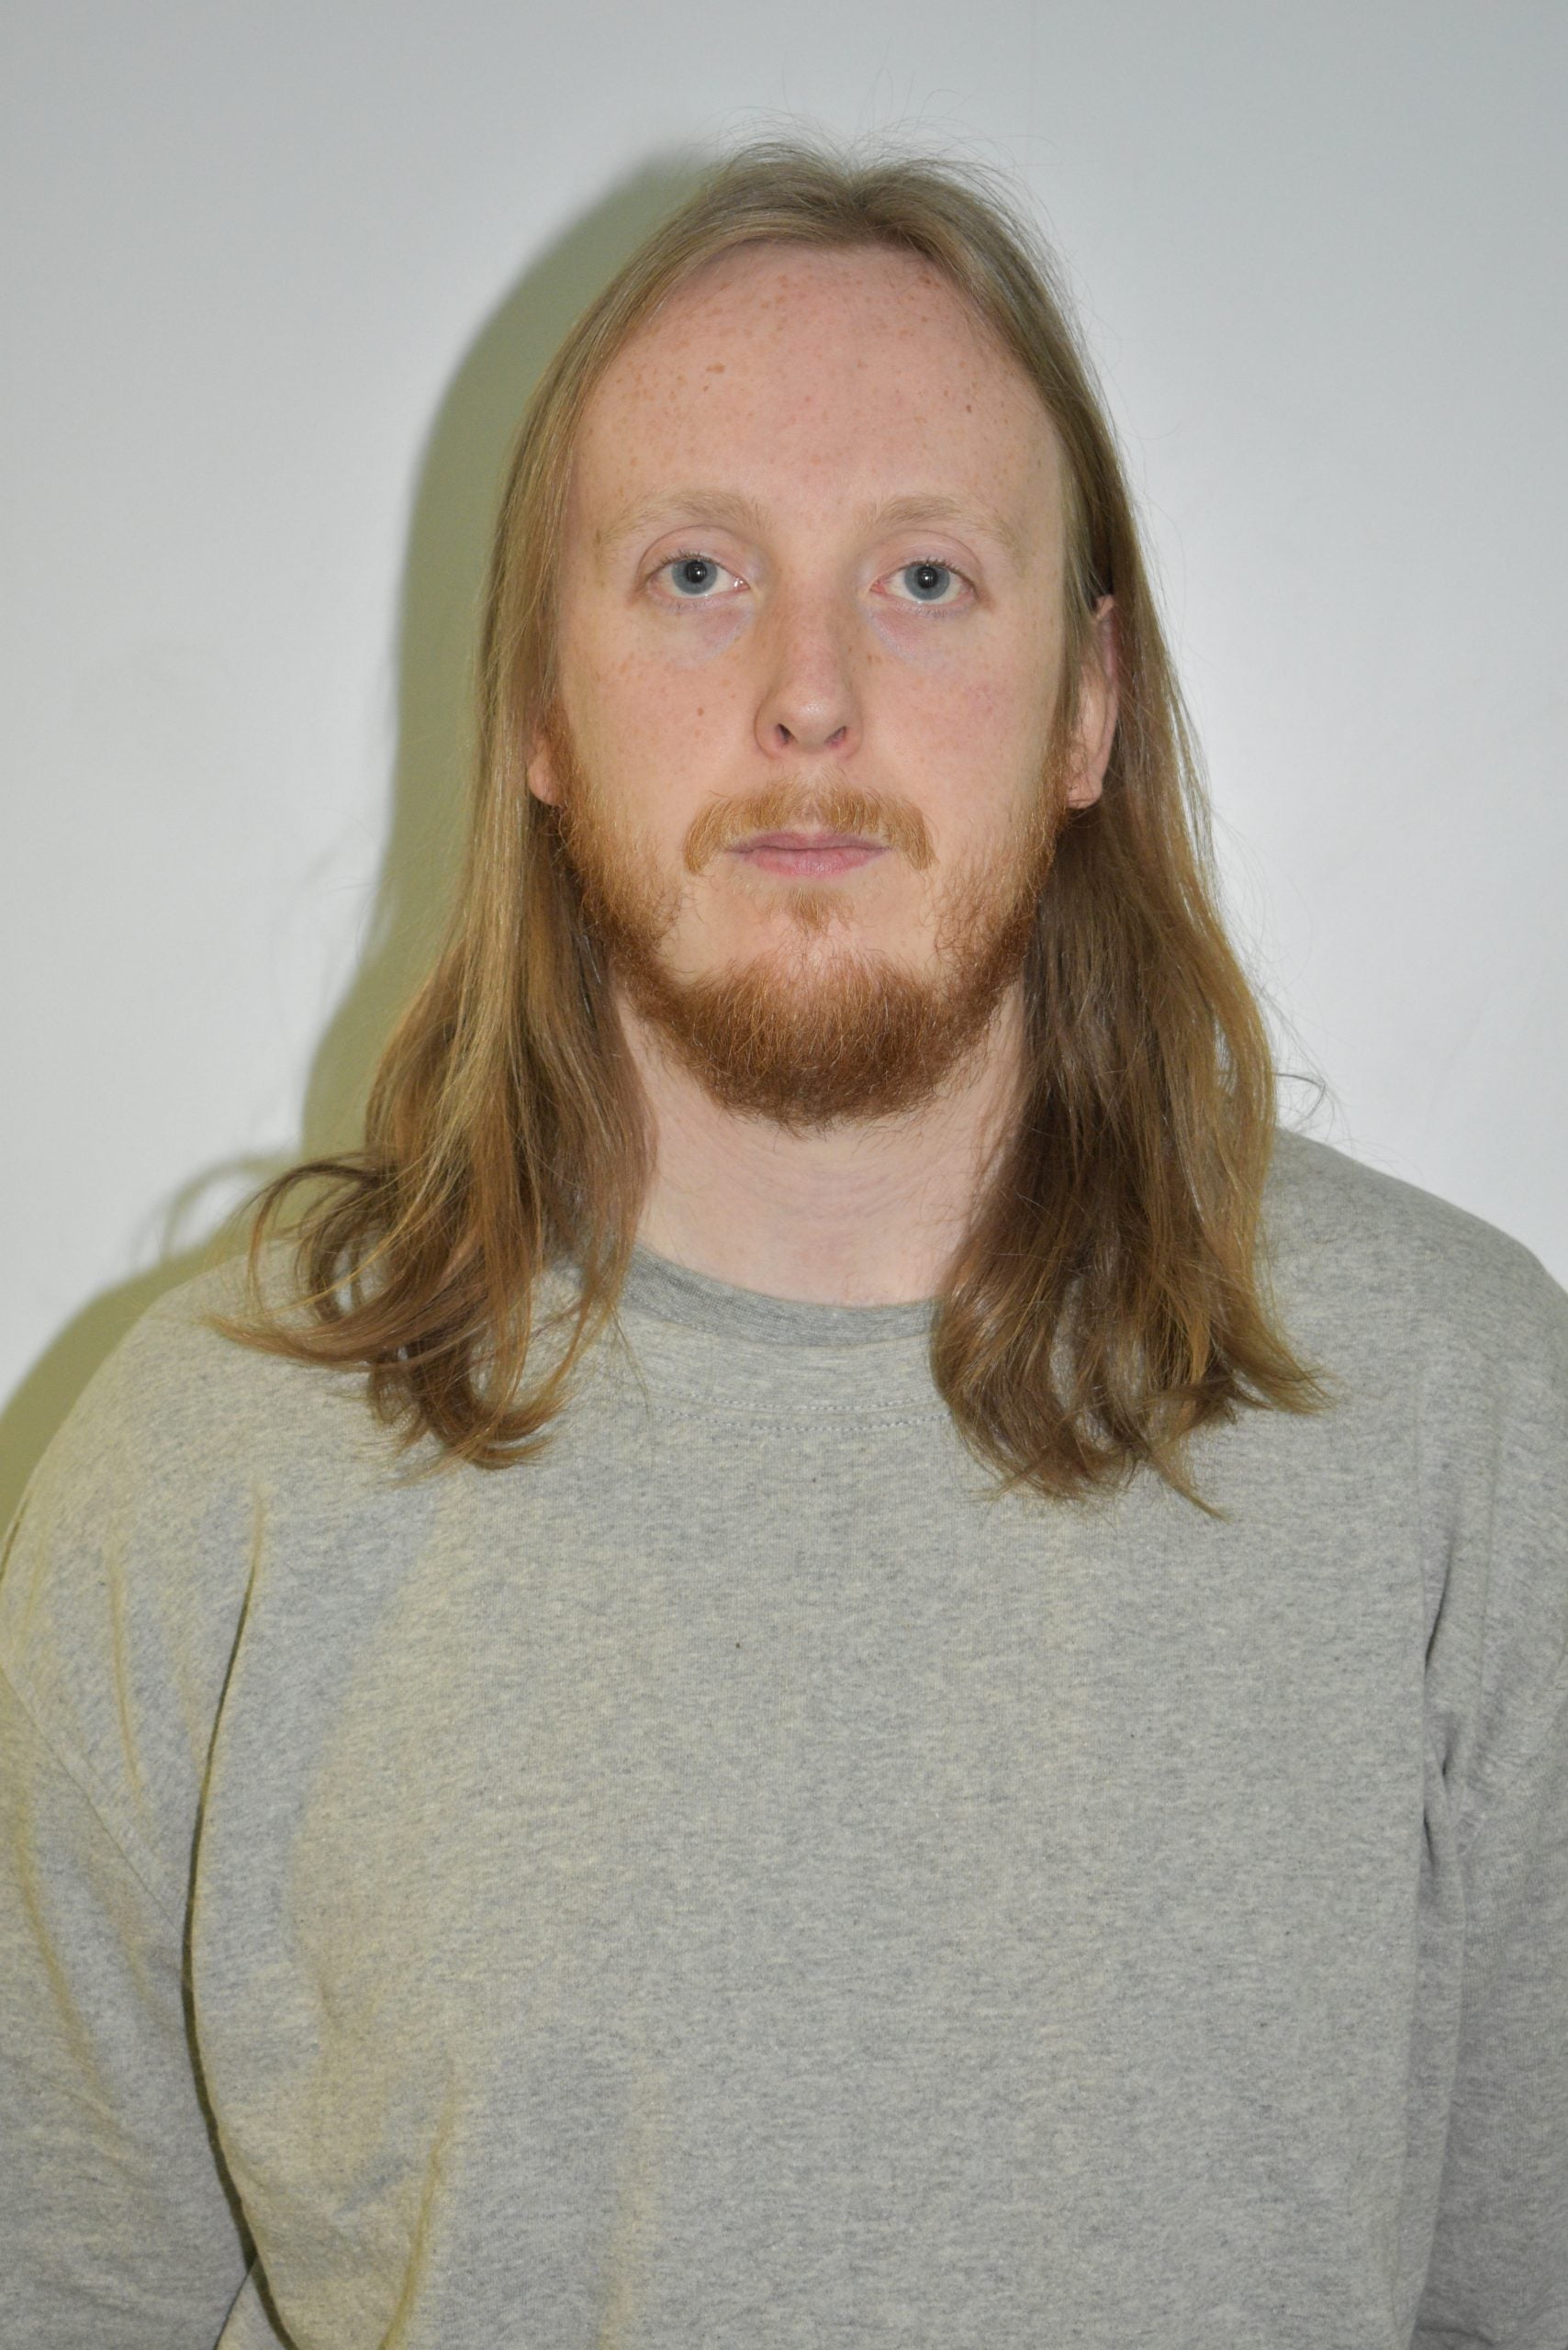 Samuel Whibley (Counter Terrorism Policing North East/PA)